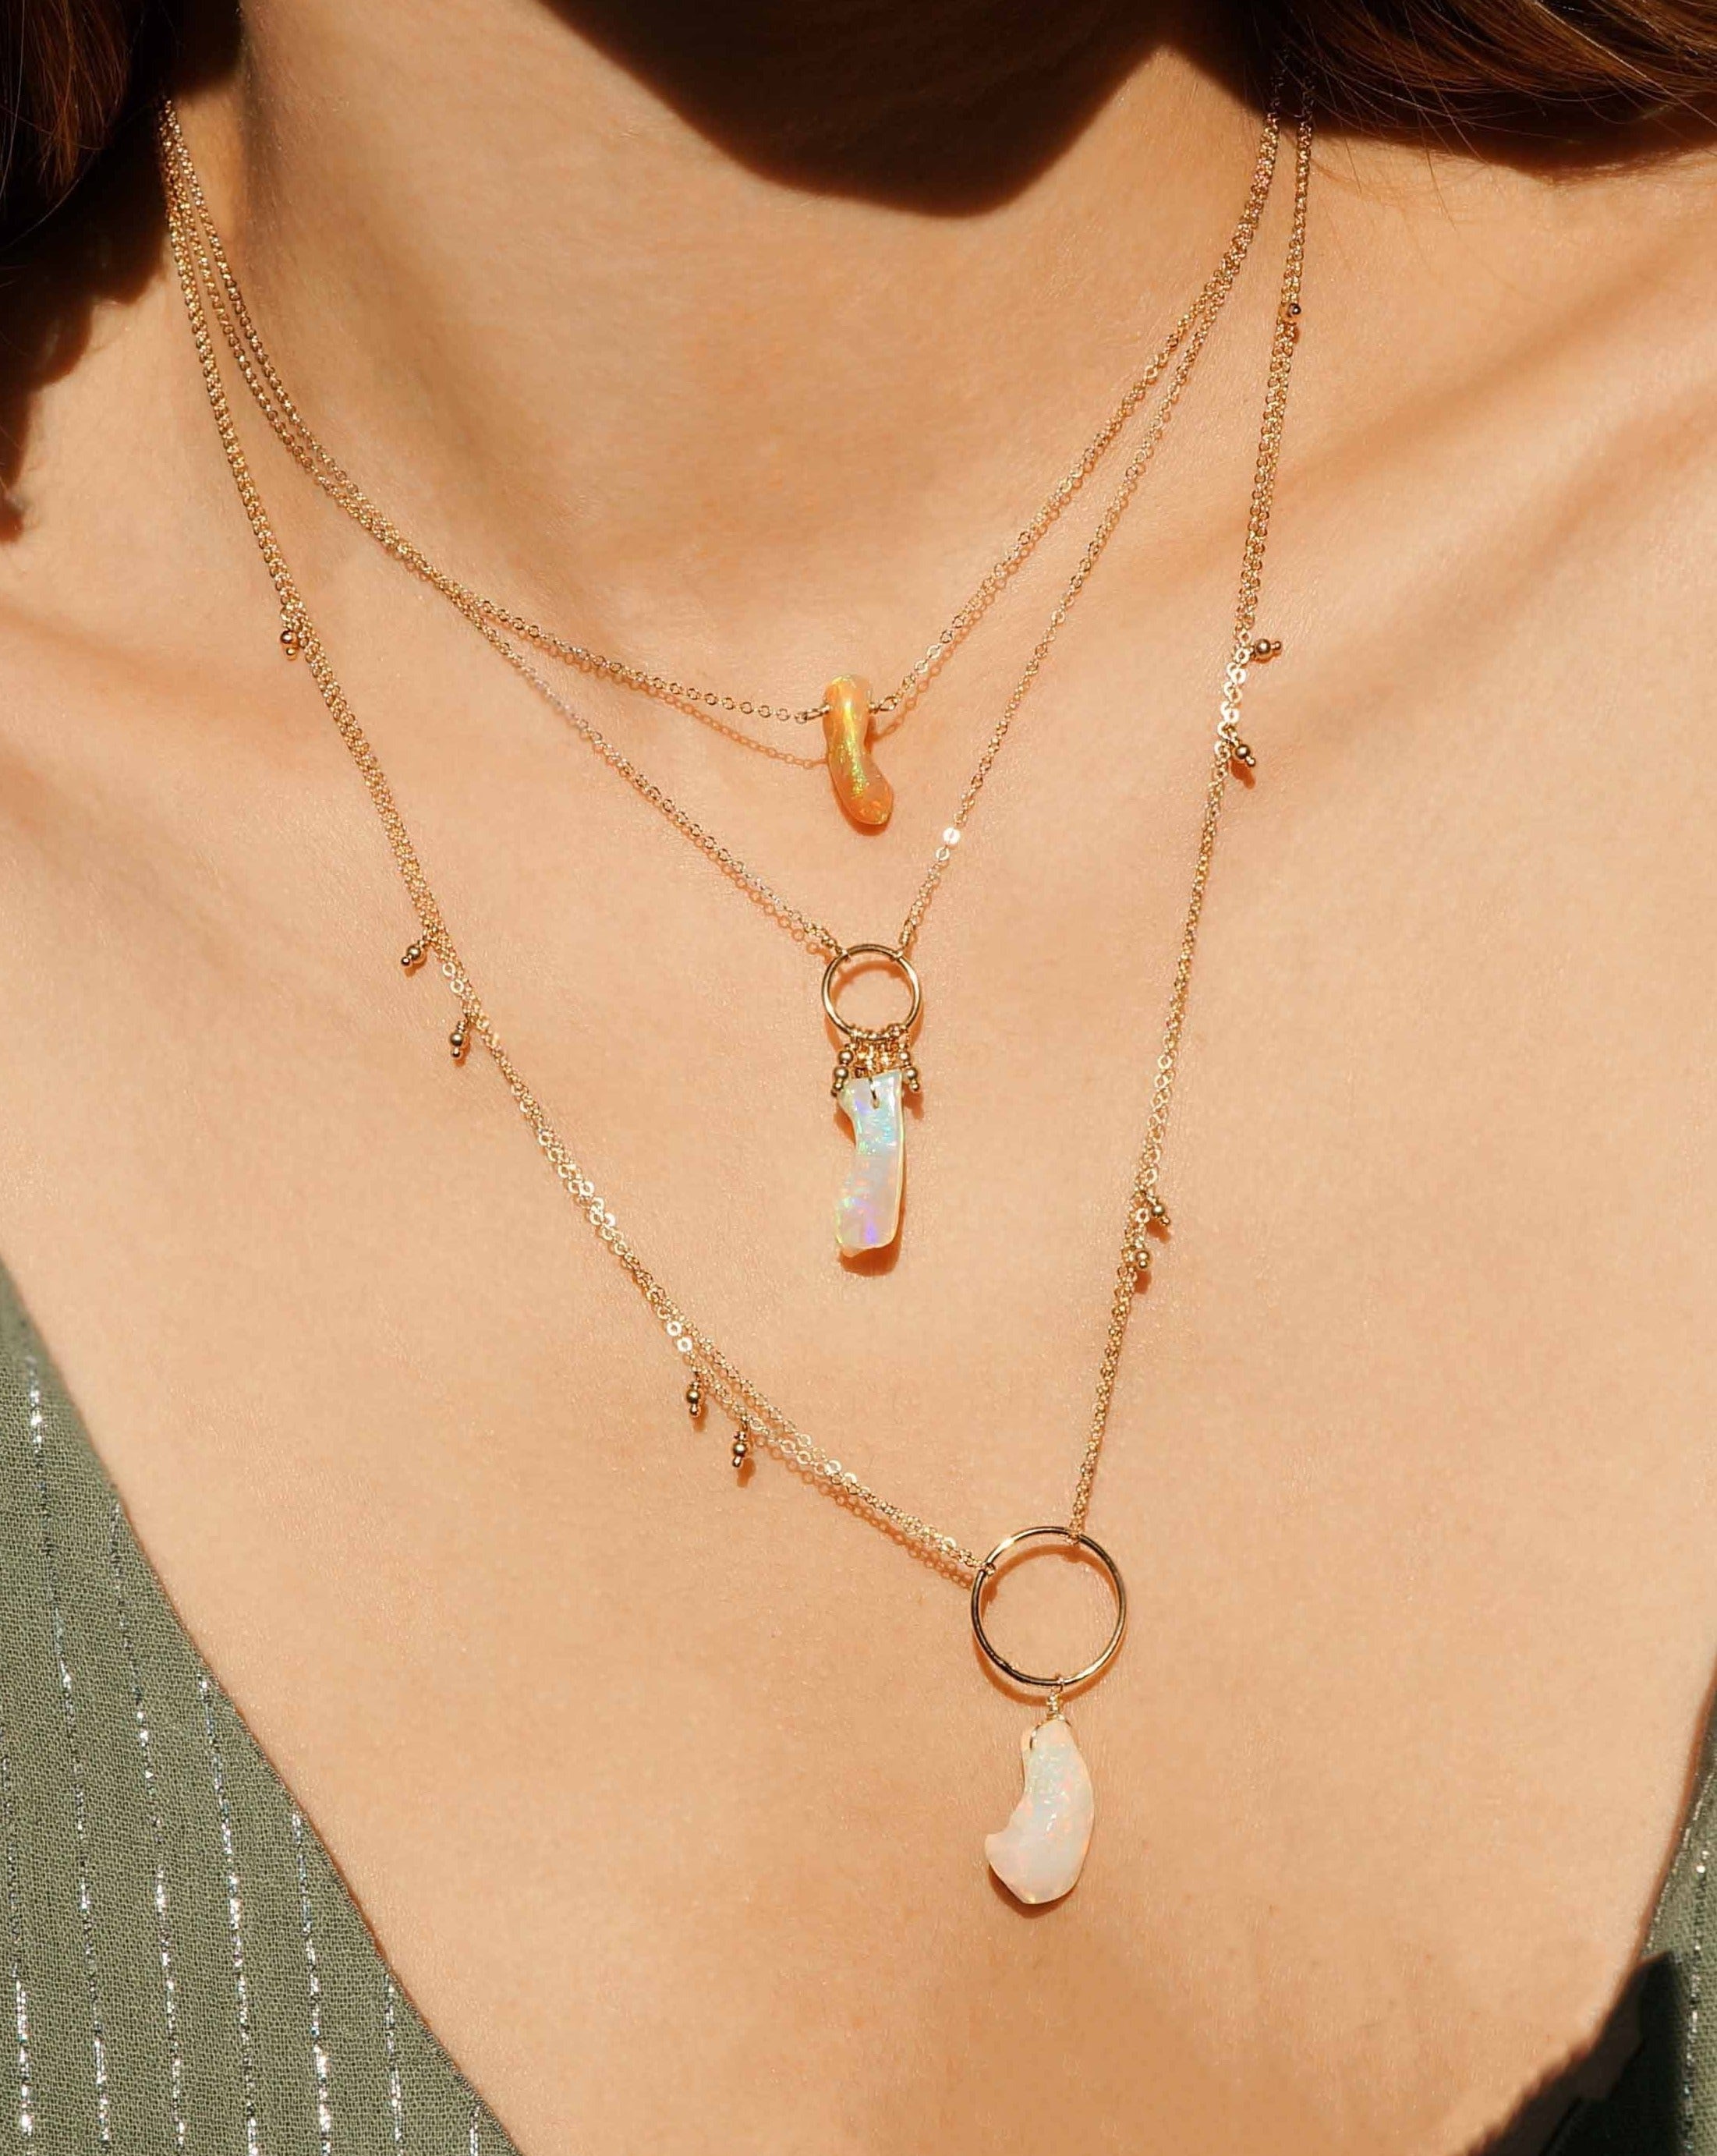 Cameena Necklace by KOZAKH. A 16 inch long necklace in 14K Gold Filled, featuring an irregular AAA+ Ethiopian Opal.